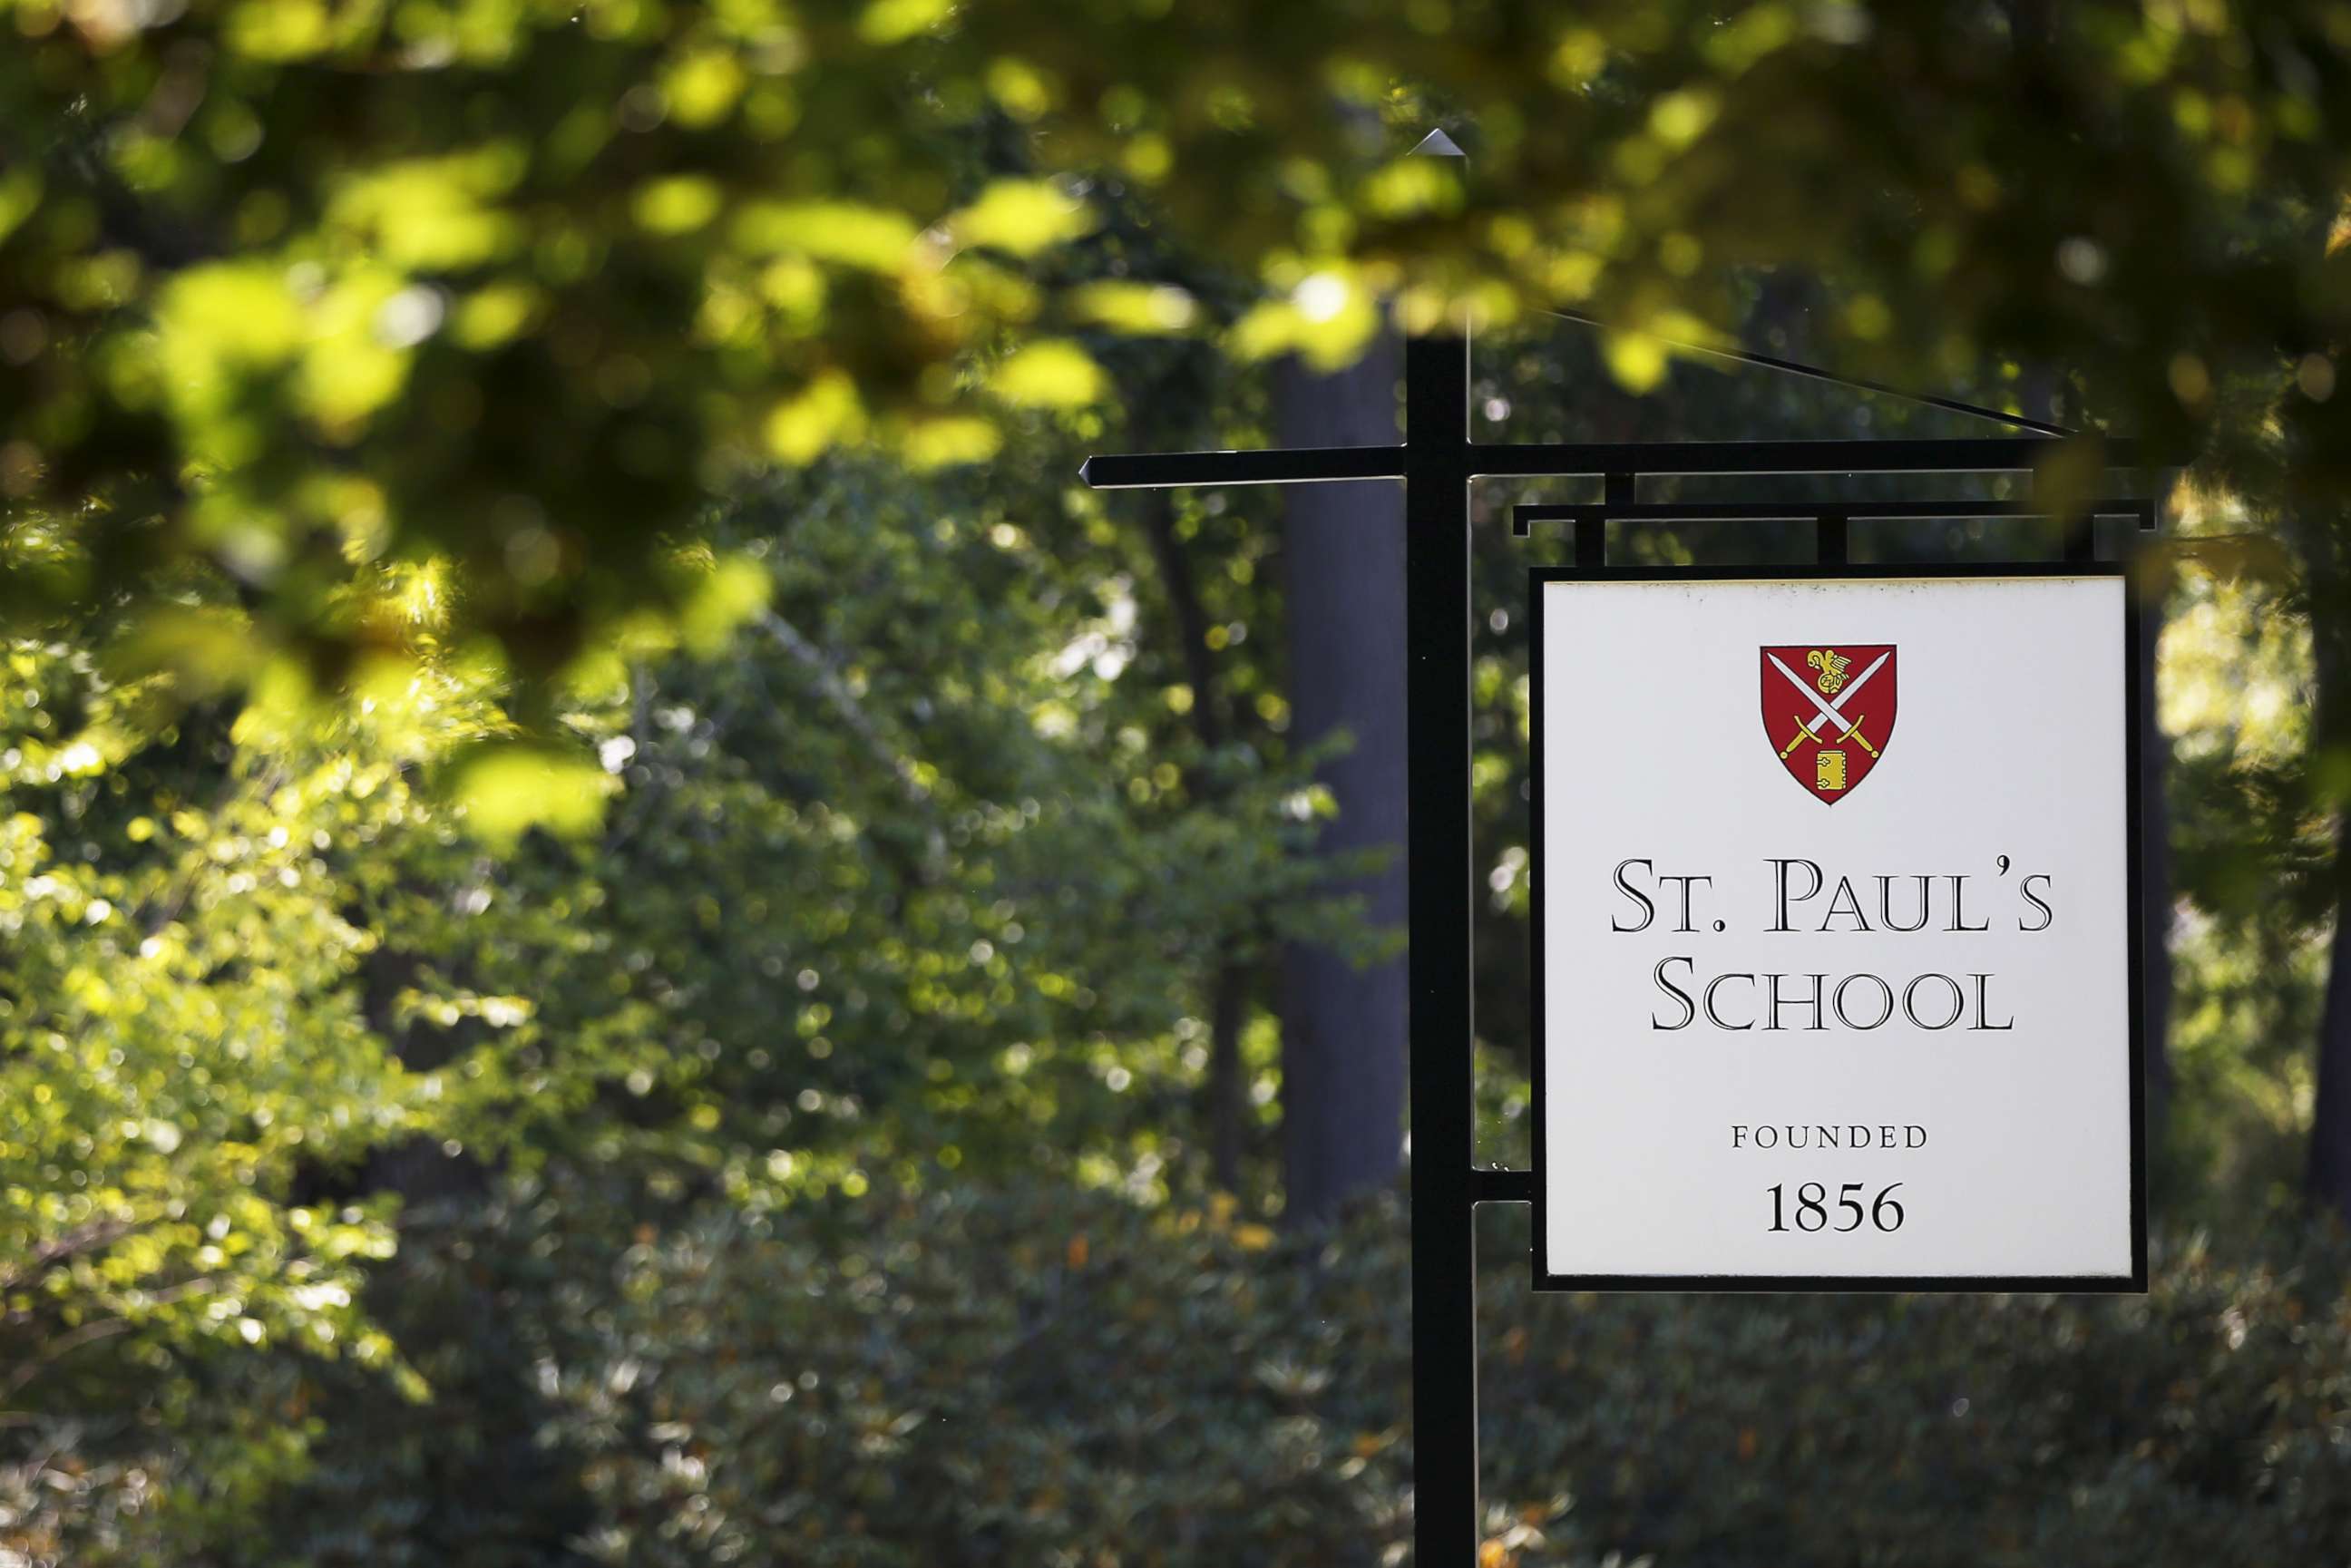 PHOTO: A sign marks the entrance to St. Paul's School in Concord, N.H., Aug. 20, 2015.